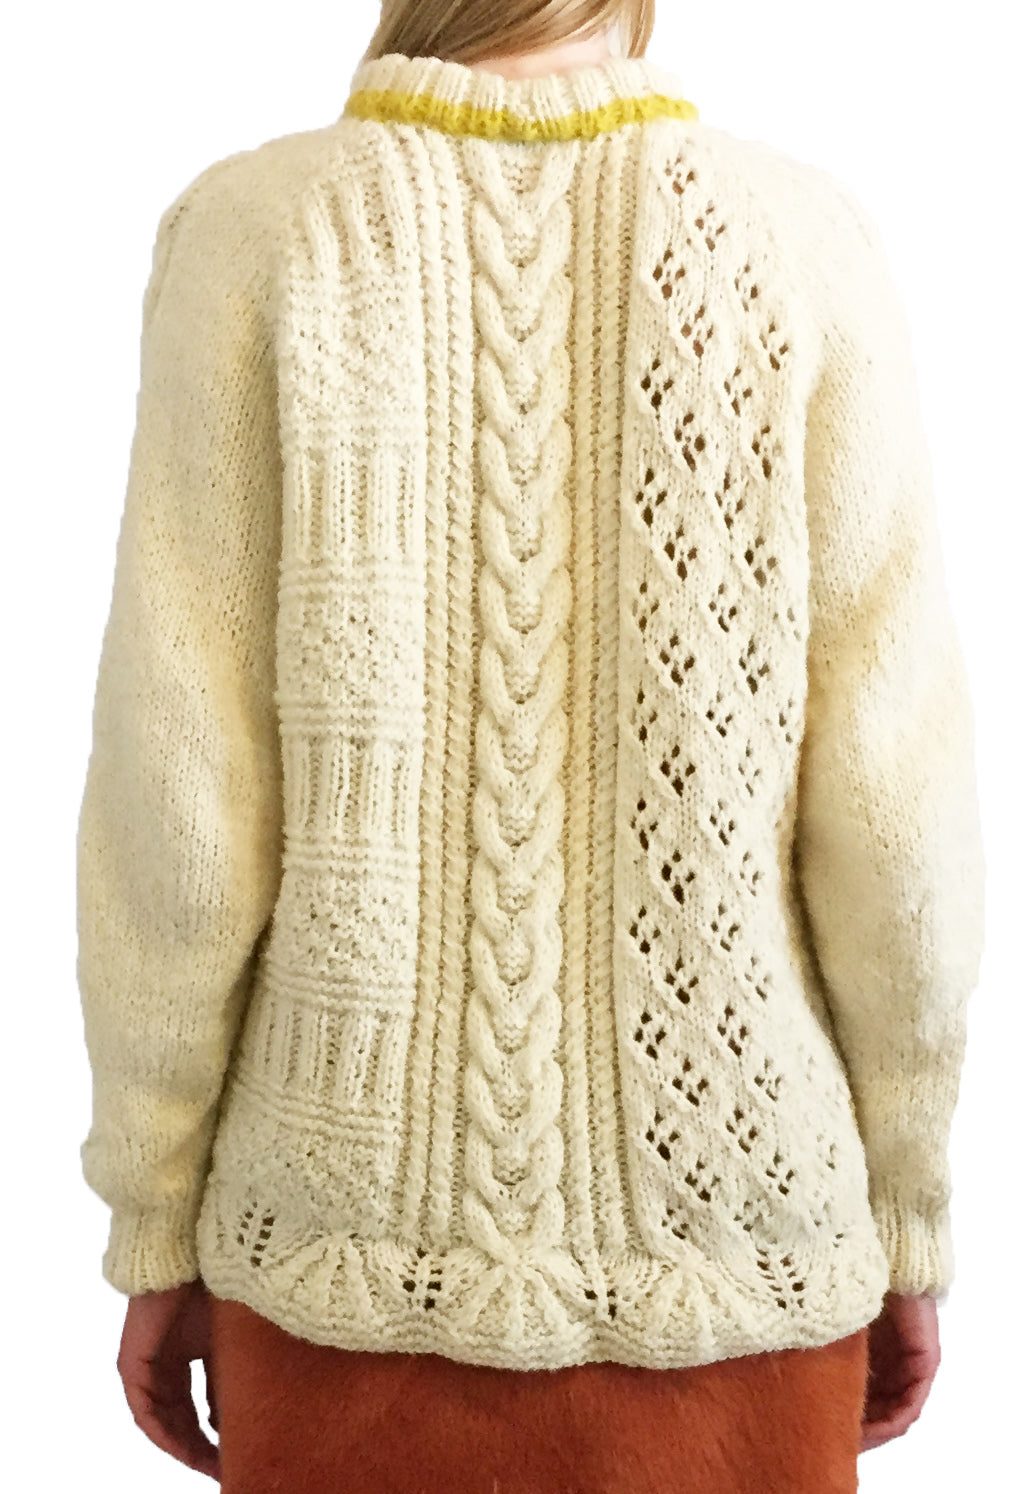 Crew neck hand knitted sweater